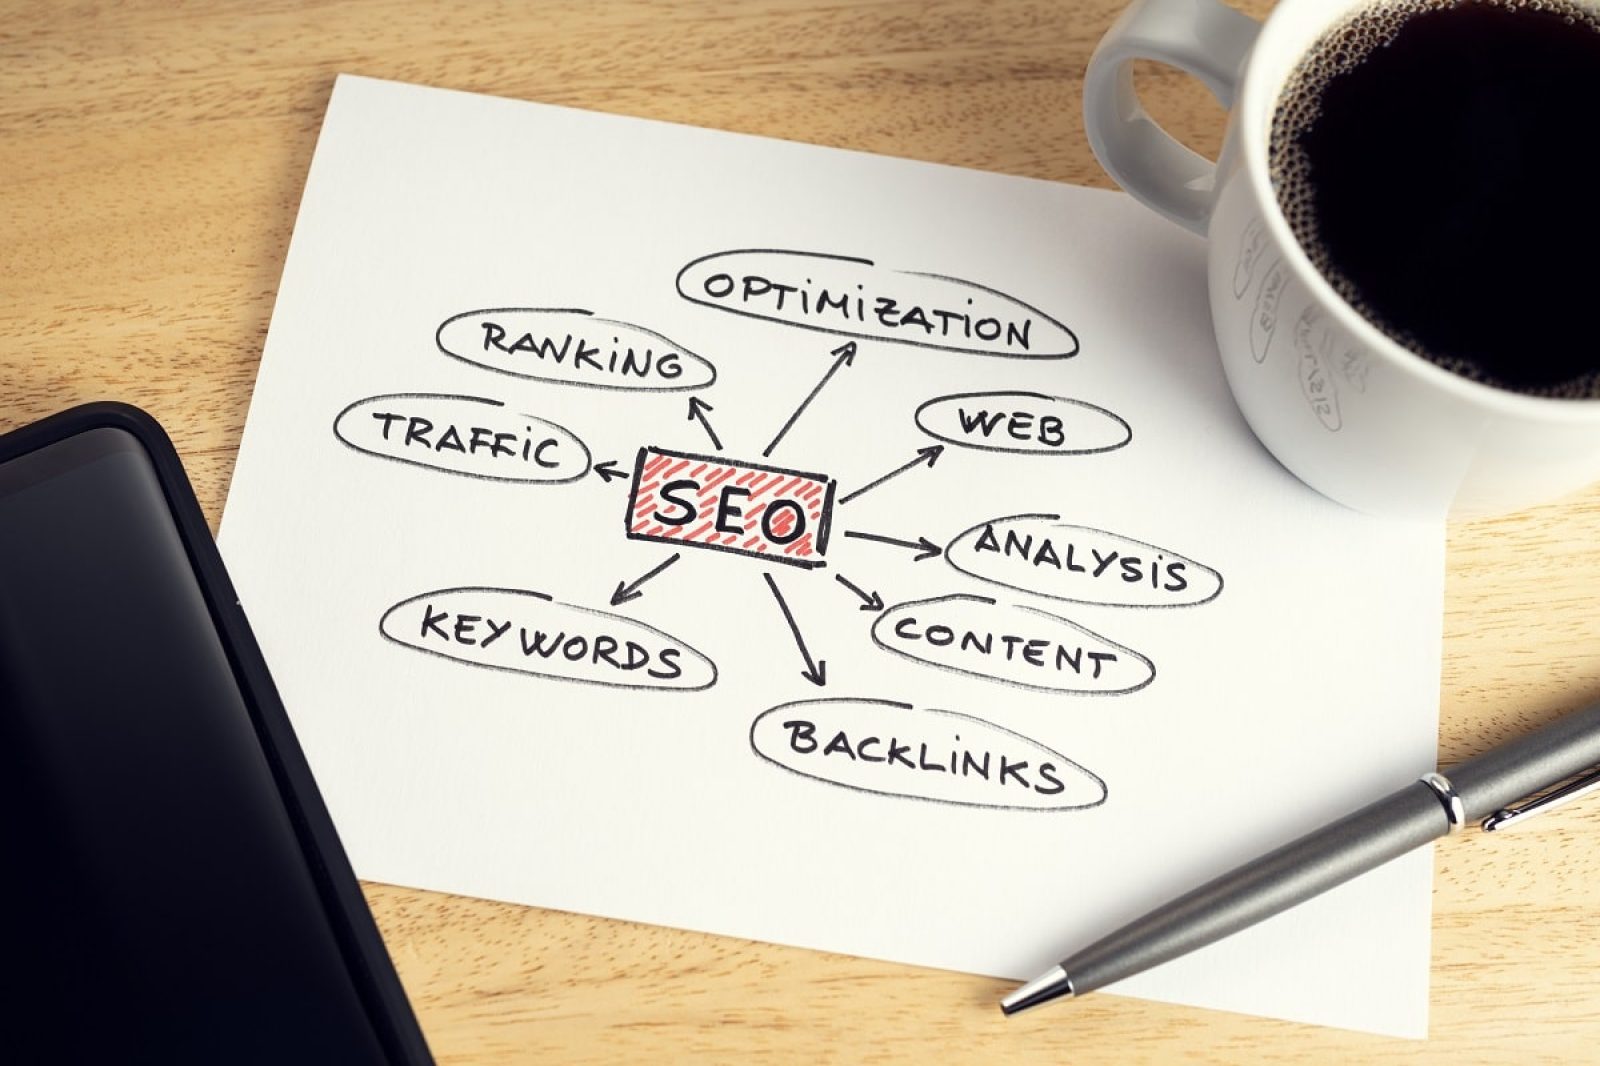 How a Search Engine Optimization Company Can Help Your Business